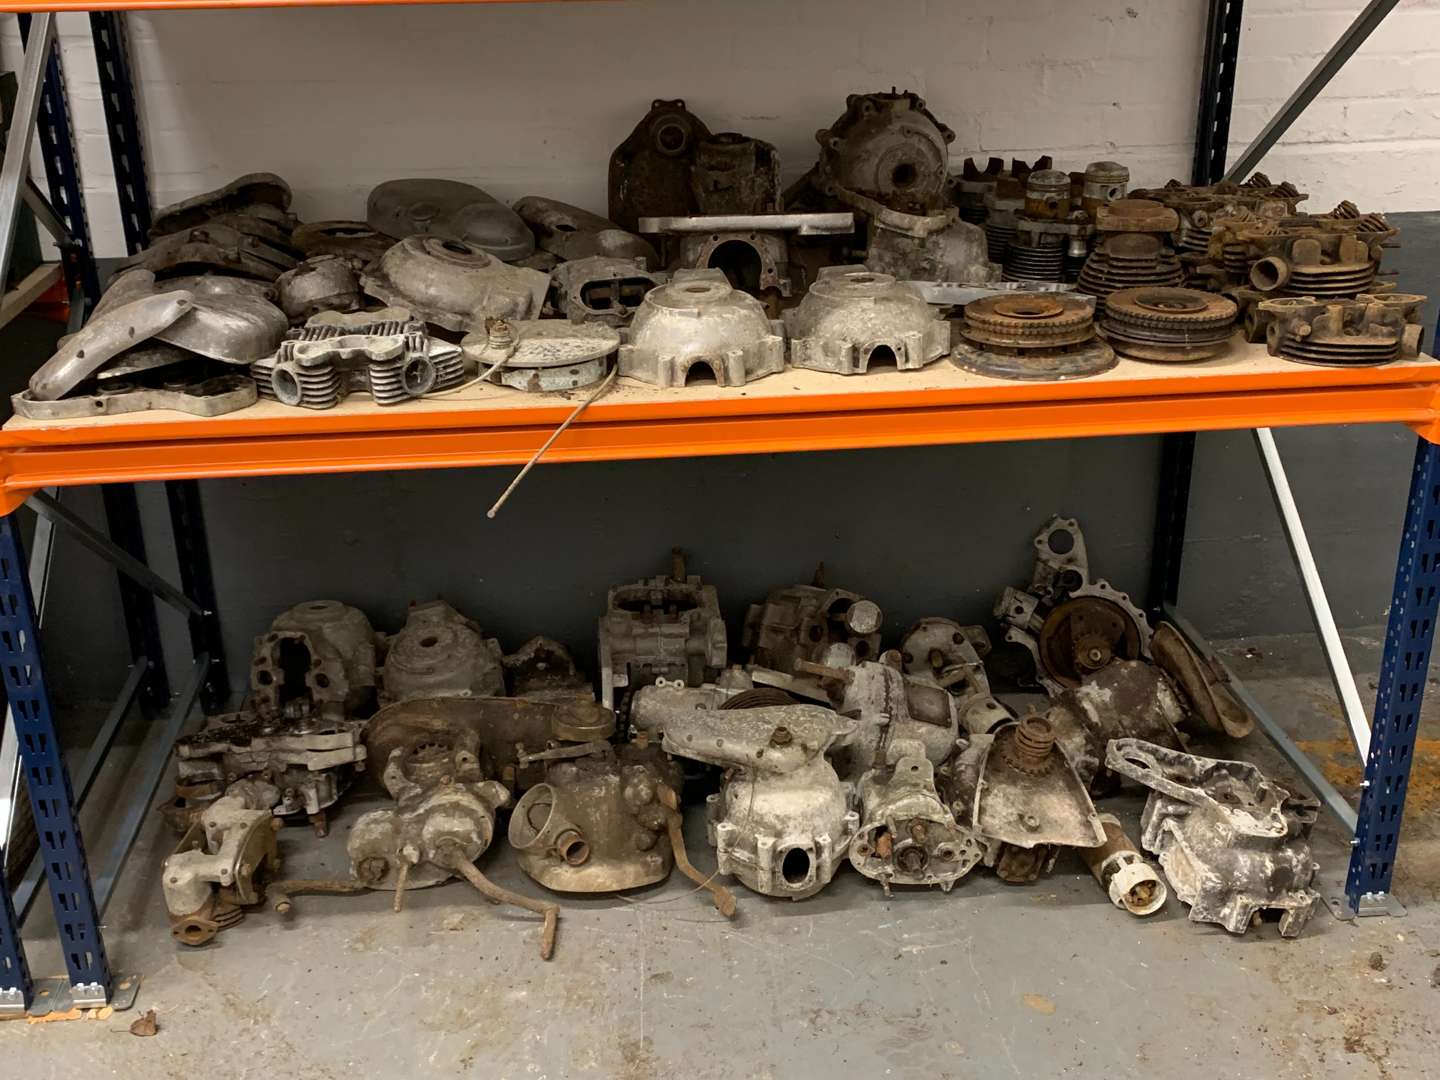 <p>Large Quantity of Vintage Motorcycle Engines and Spares</p>